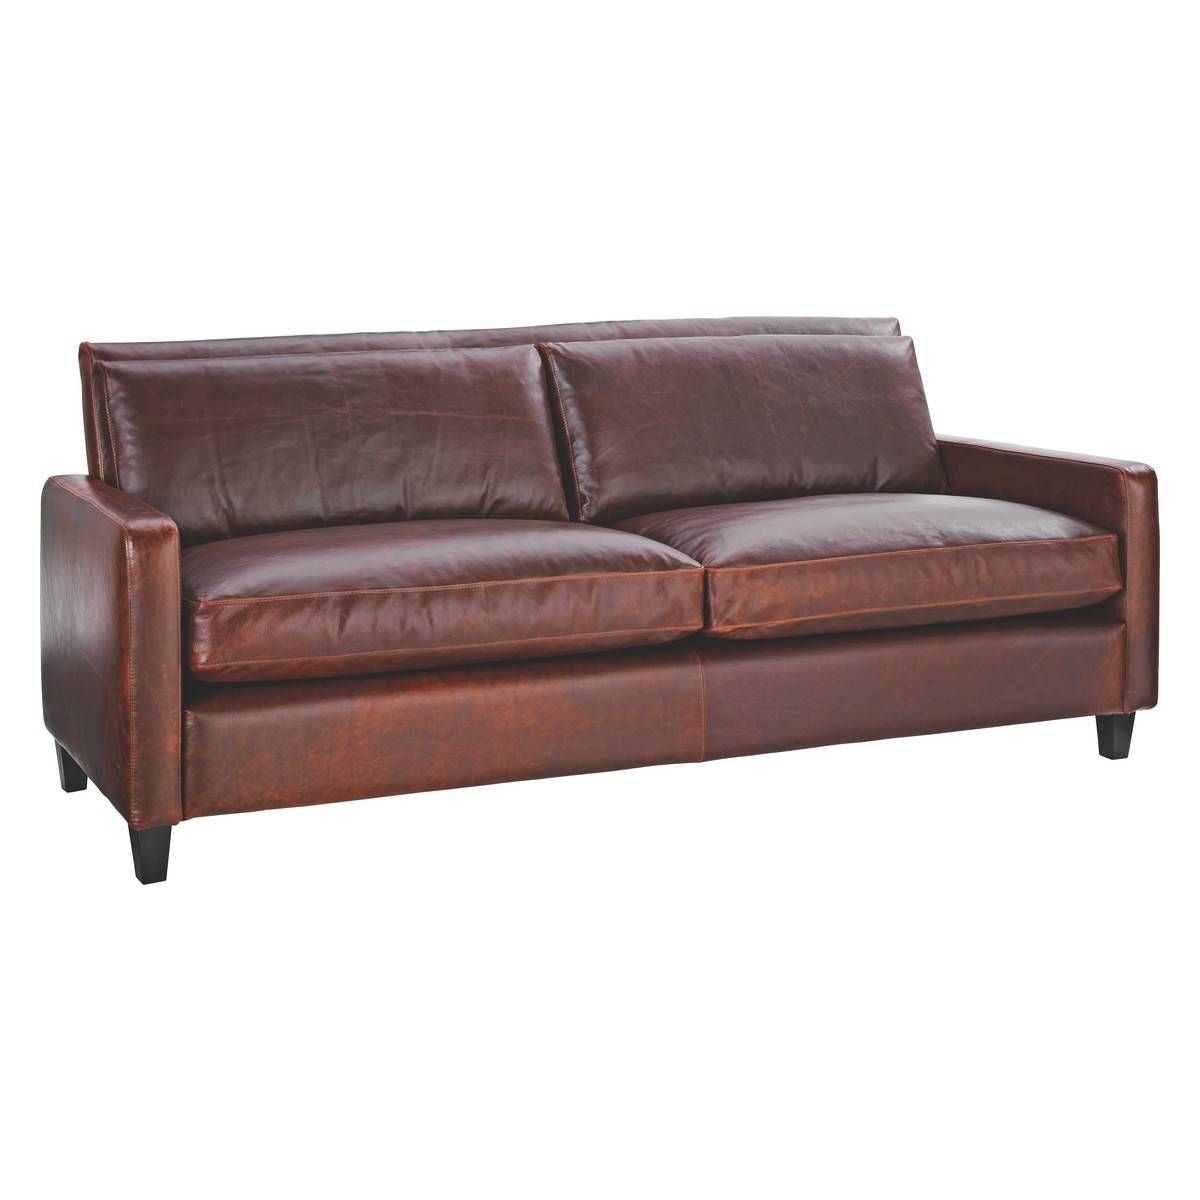 Tan Sofa – Home Design Ideas And Pictures In Light Tan Leather Sofas (View 26 of 30)